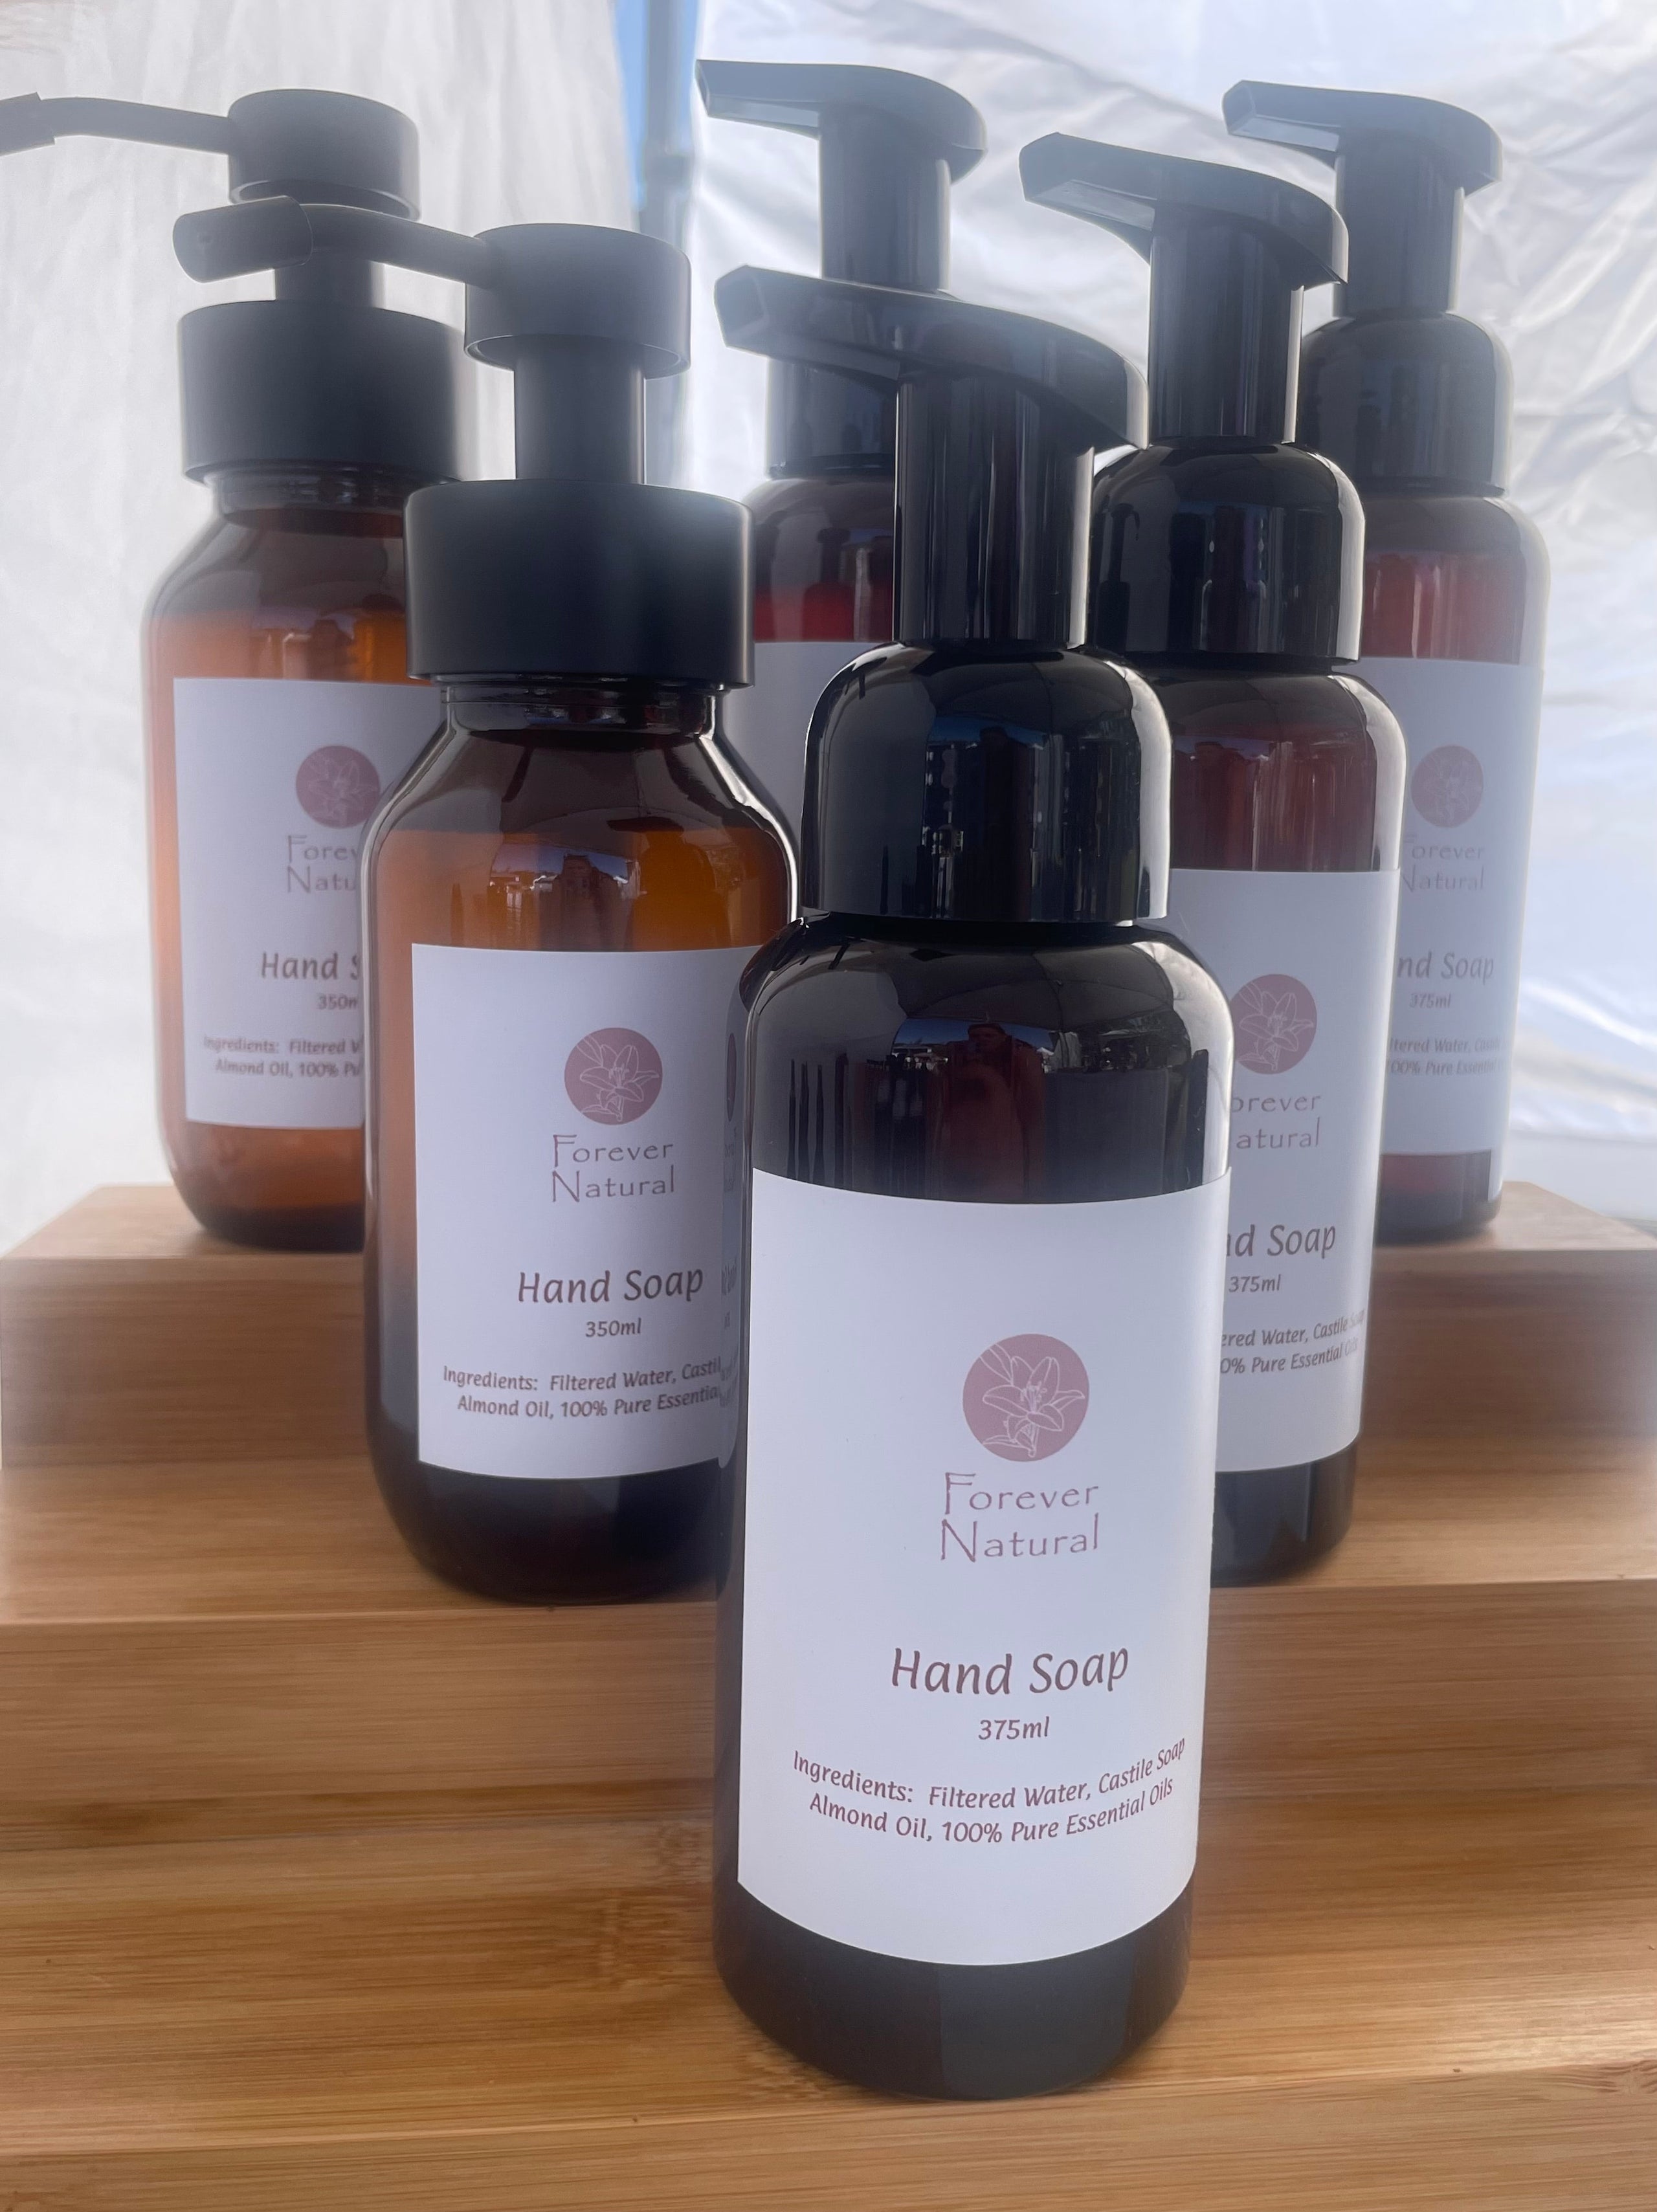 Lovingly made natural body & cleaning products with essential oils.